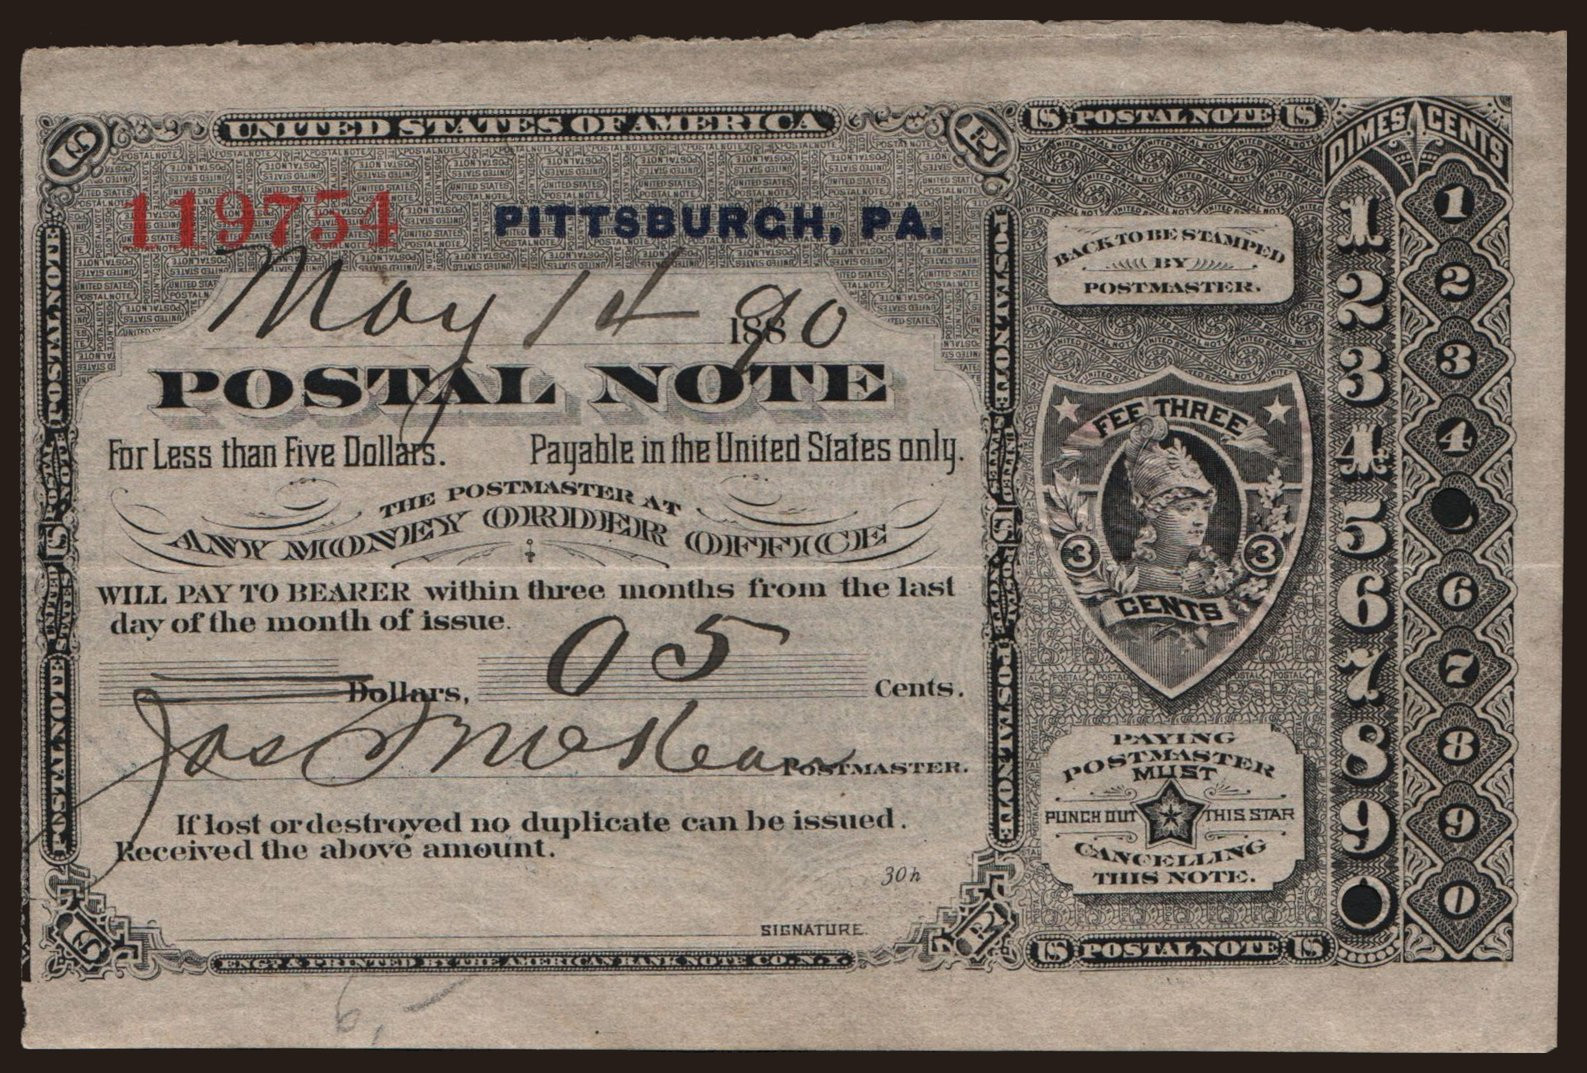 Postal Note, 5 cents, 1890